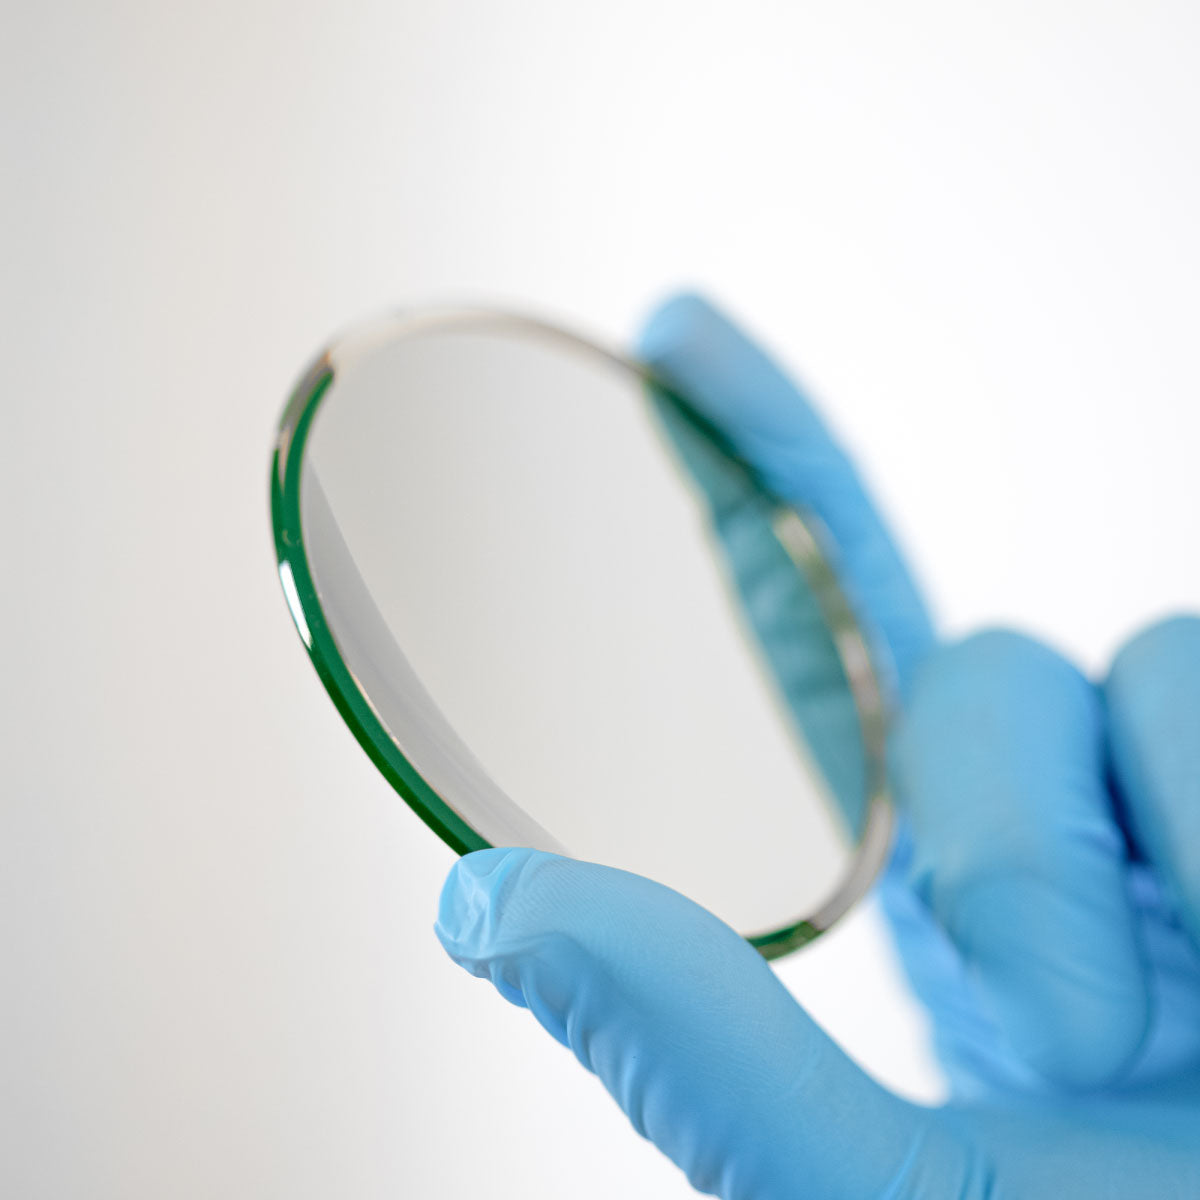 Avulux lens technology held up in hand